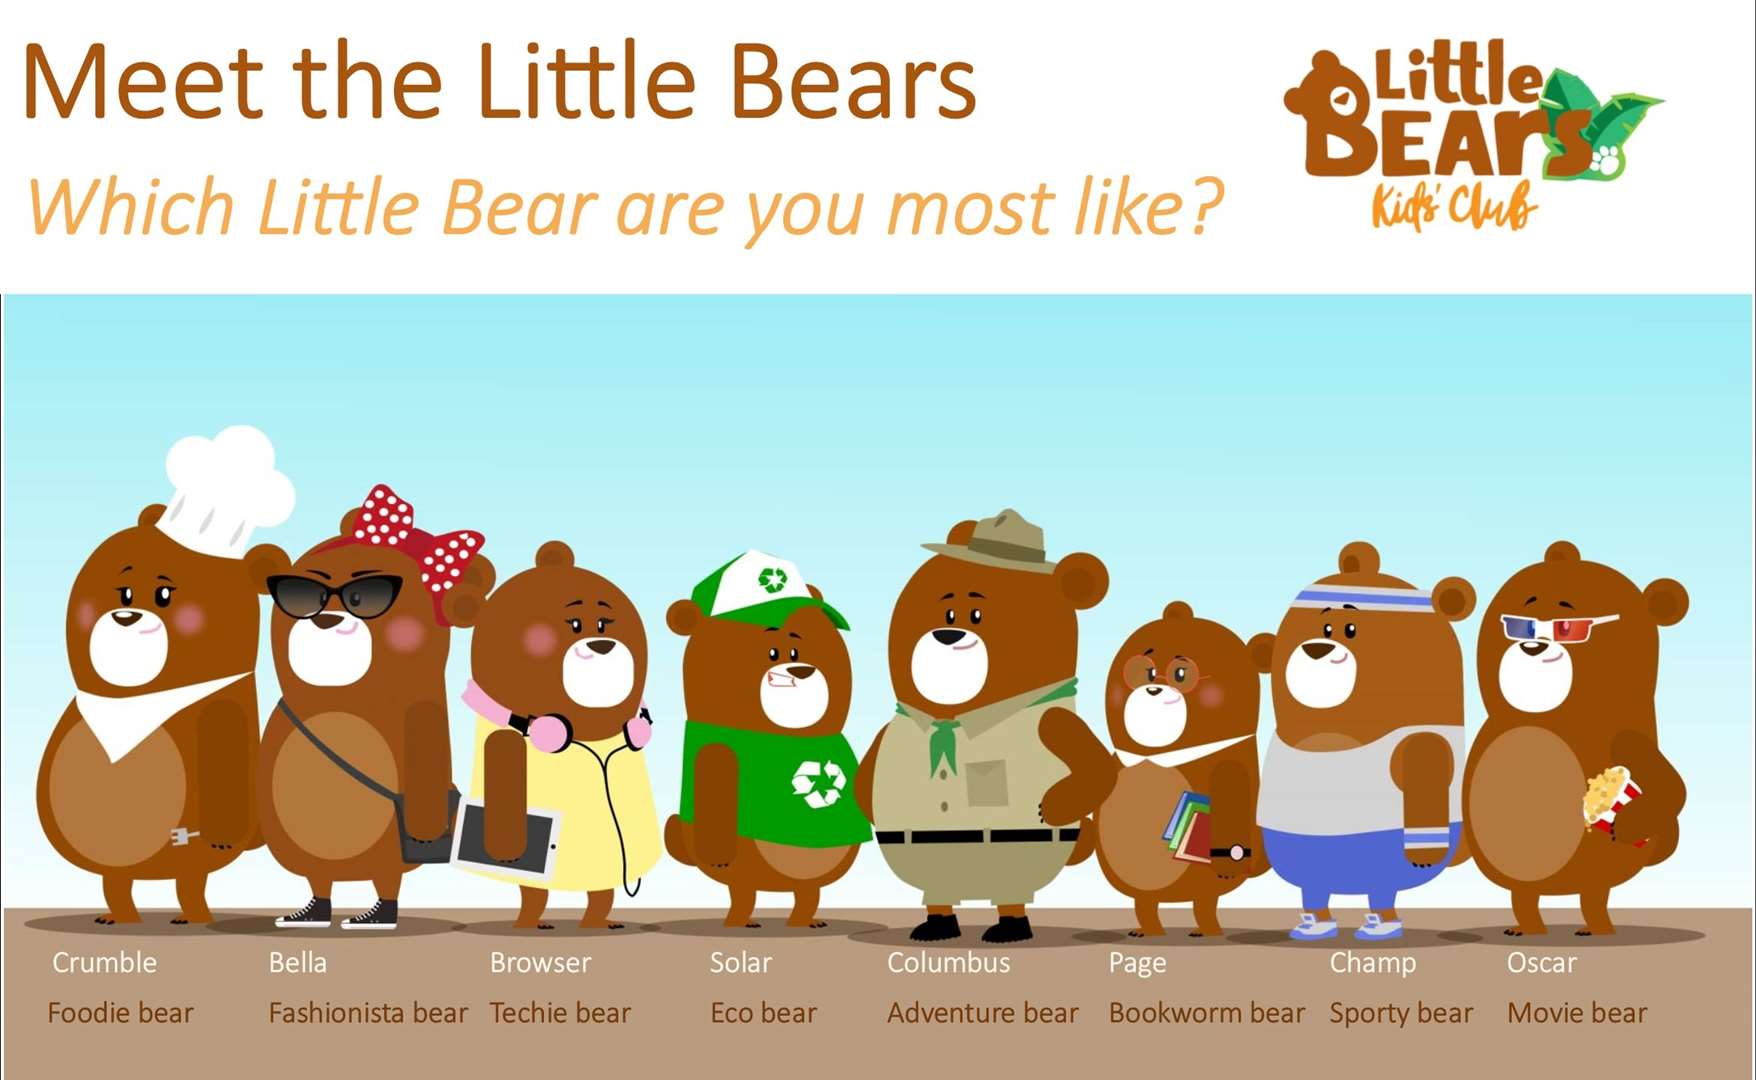 The Little Bears Kids' Club has eight individual bear characters, each one with its own personality.